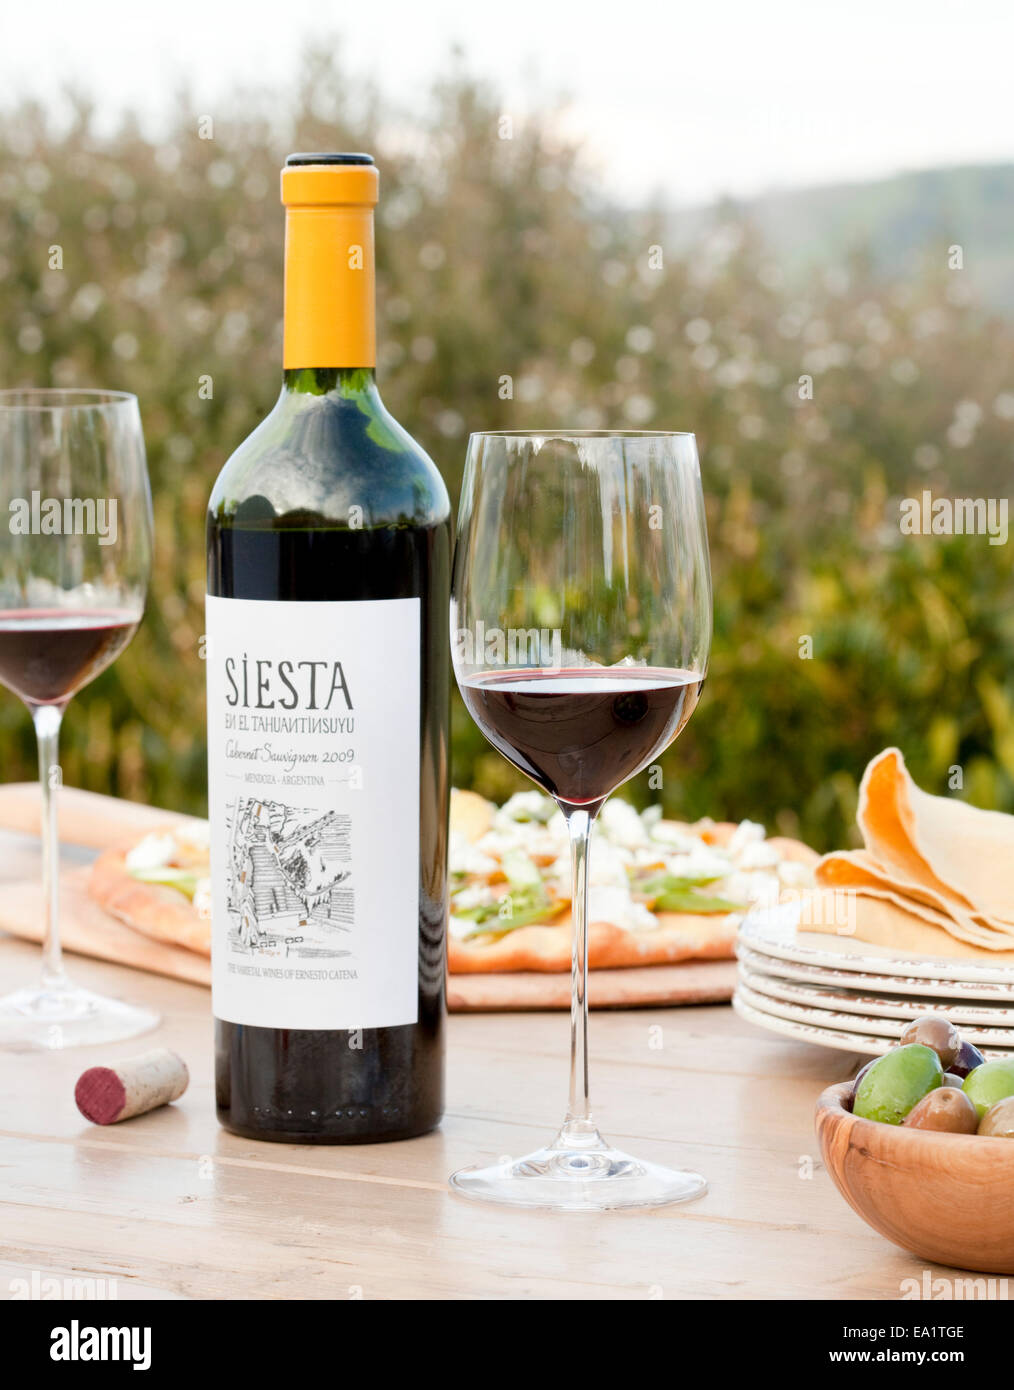 red wine bottle and glass on table outdoors Stock Photo